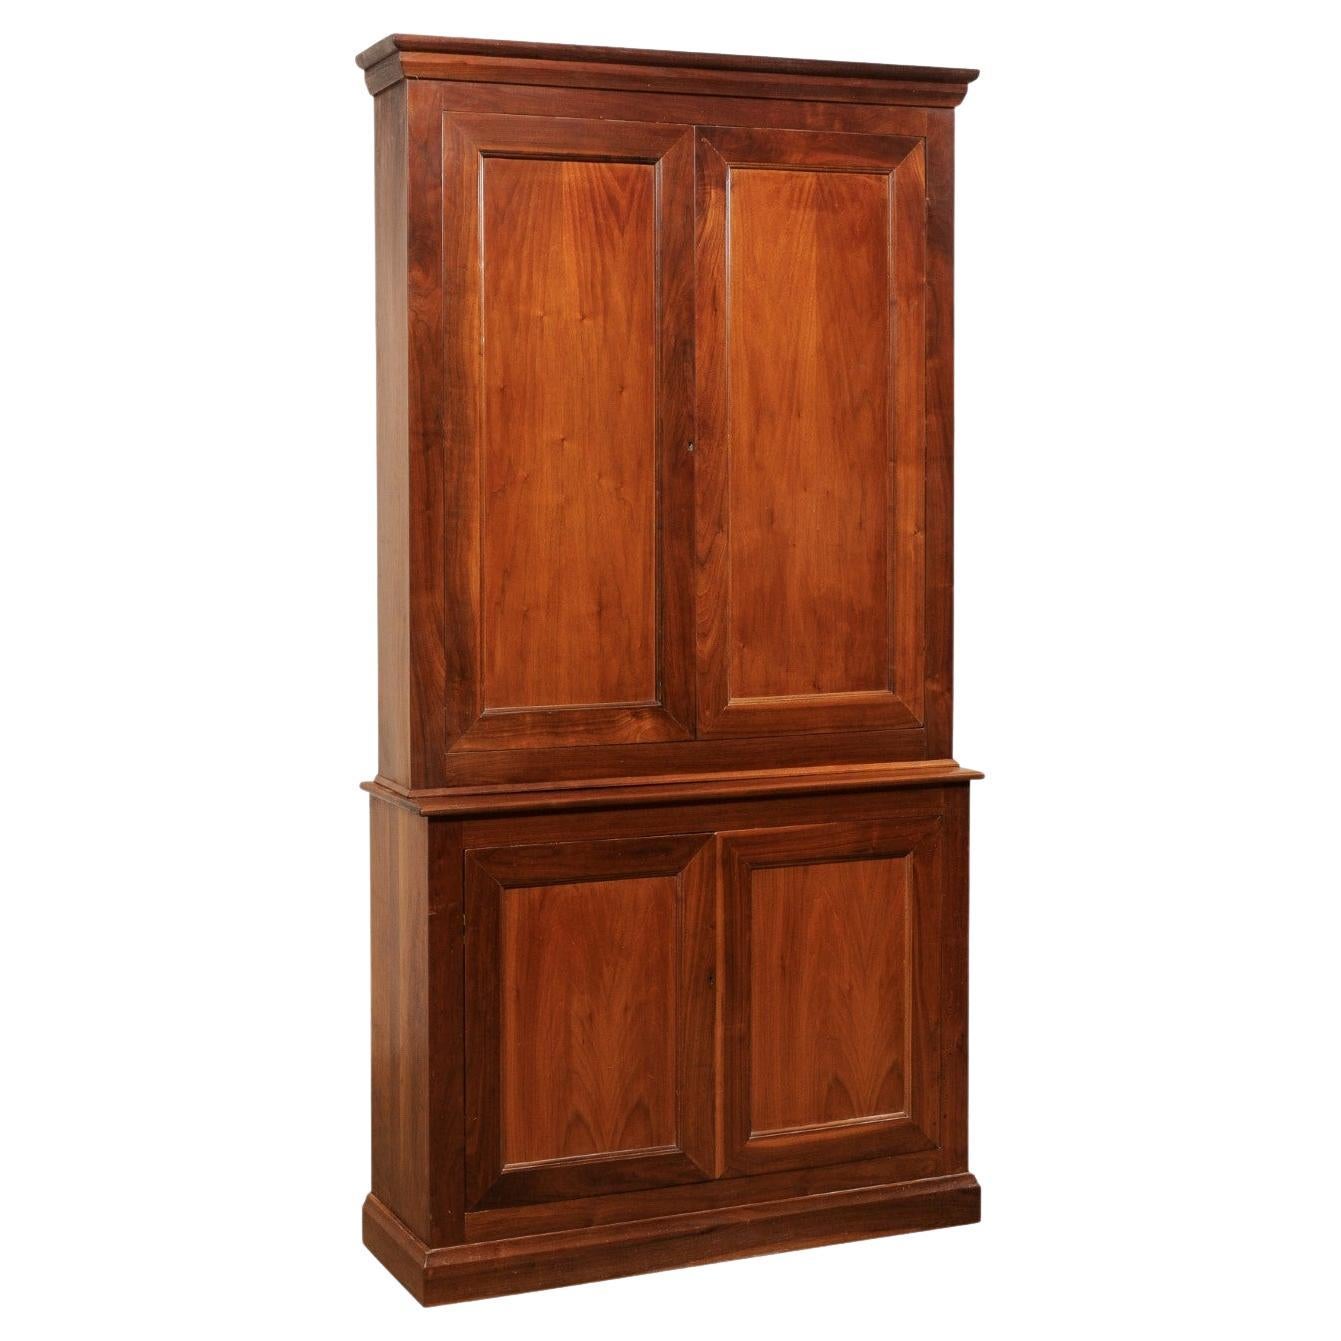 French Cherry Wood 7.5+ Ft. Tall Enclosed Cabinet with Slender Depth, Mid 20th c For Sale